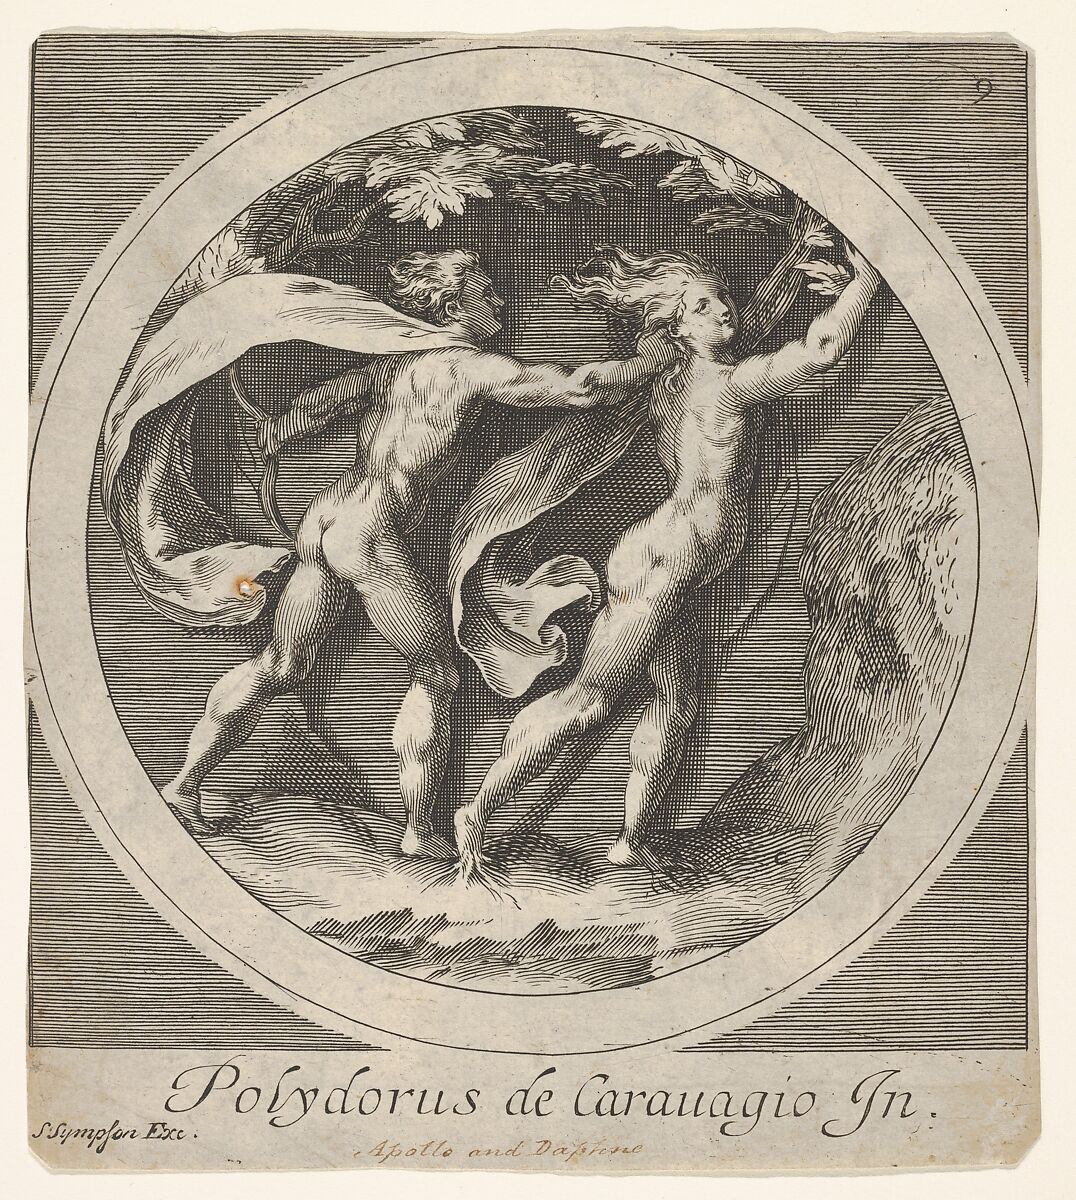 Apollo pursuing Daphne, whose toes take the form of tree roots, a round composition, reverse copy after a series of engravings by Cherubino Alberti of mythological scenes after Polidoro da Caravaggio, Anonymous, Engraving 